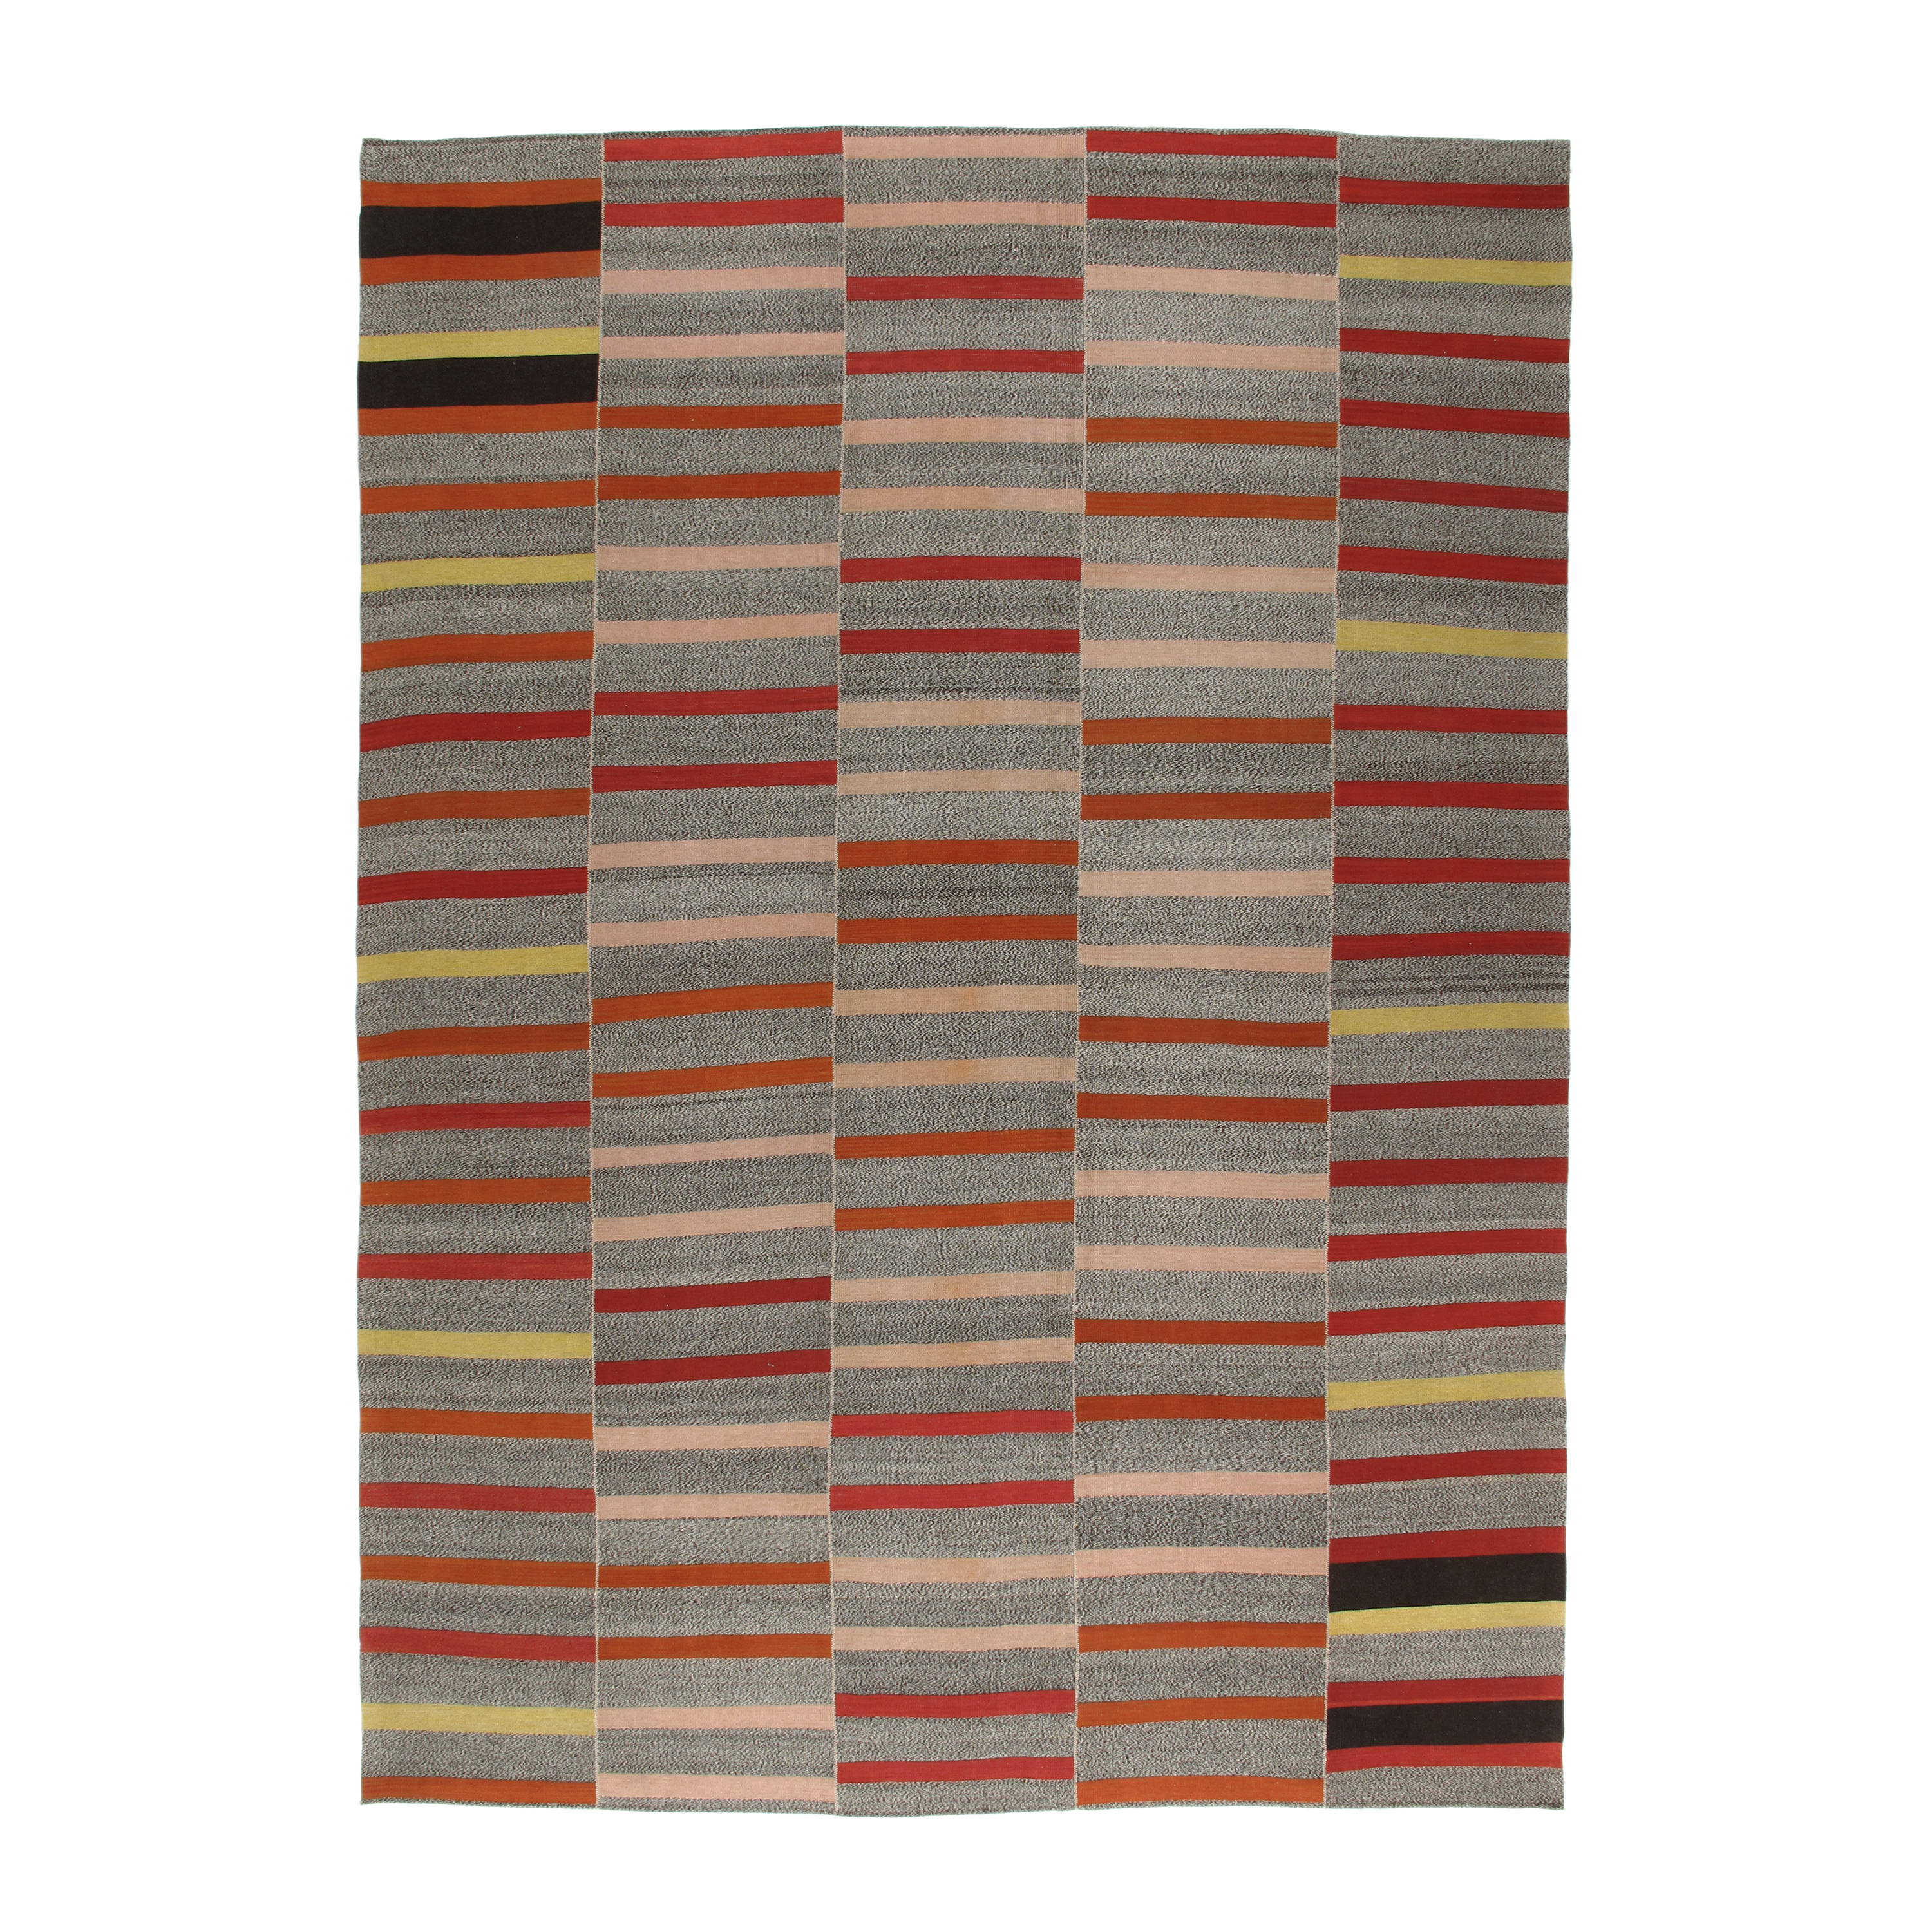 This Mazandaran rug is hand-woven and made of 100% wool.